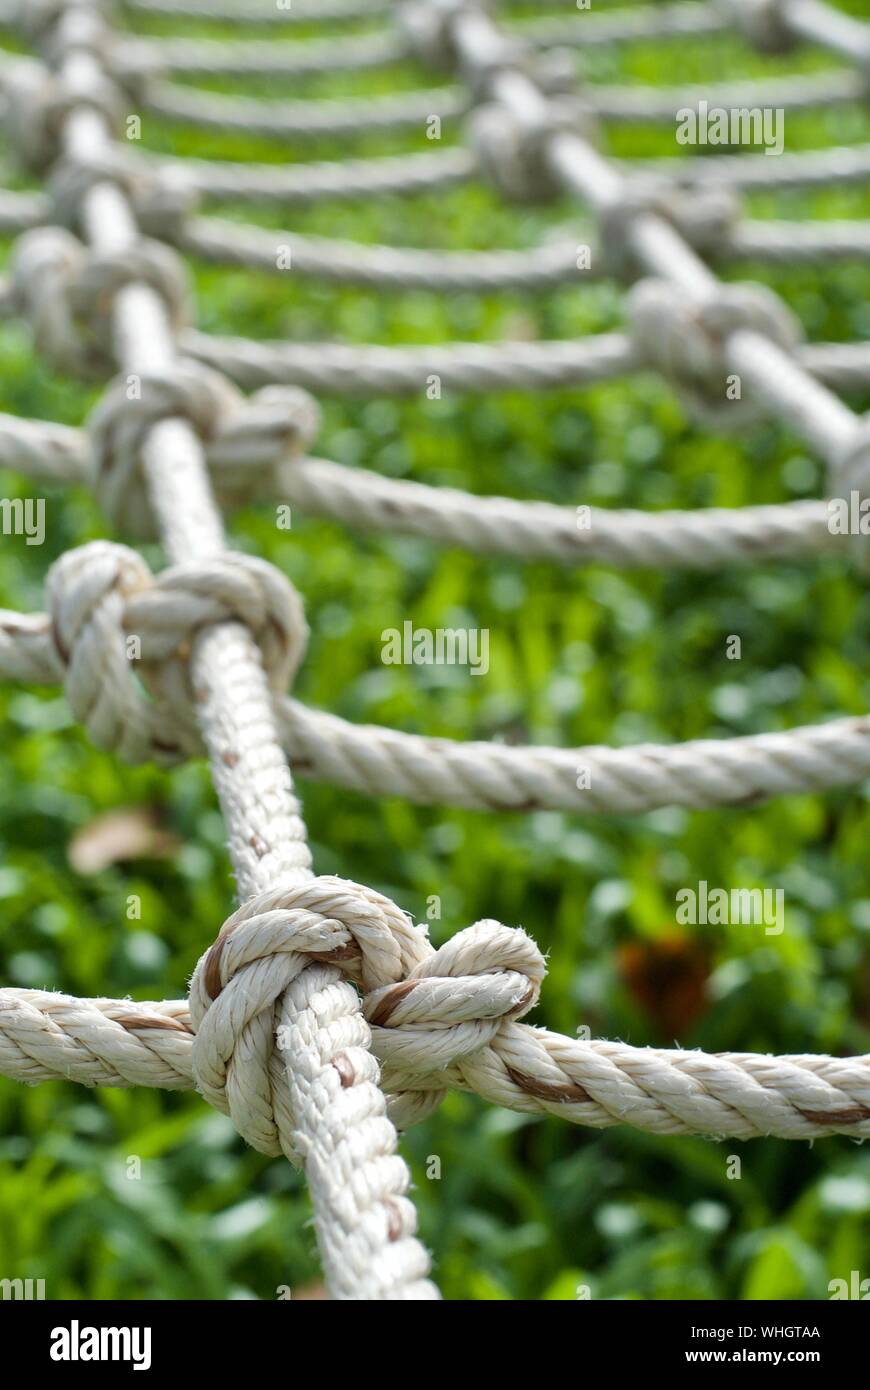 Close-up Of Climbing Rope Over Grassy Field At Playground Stock Photo